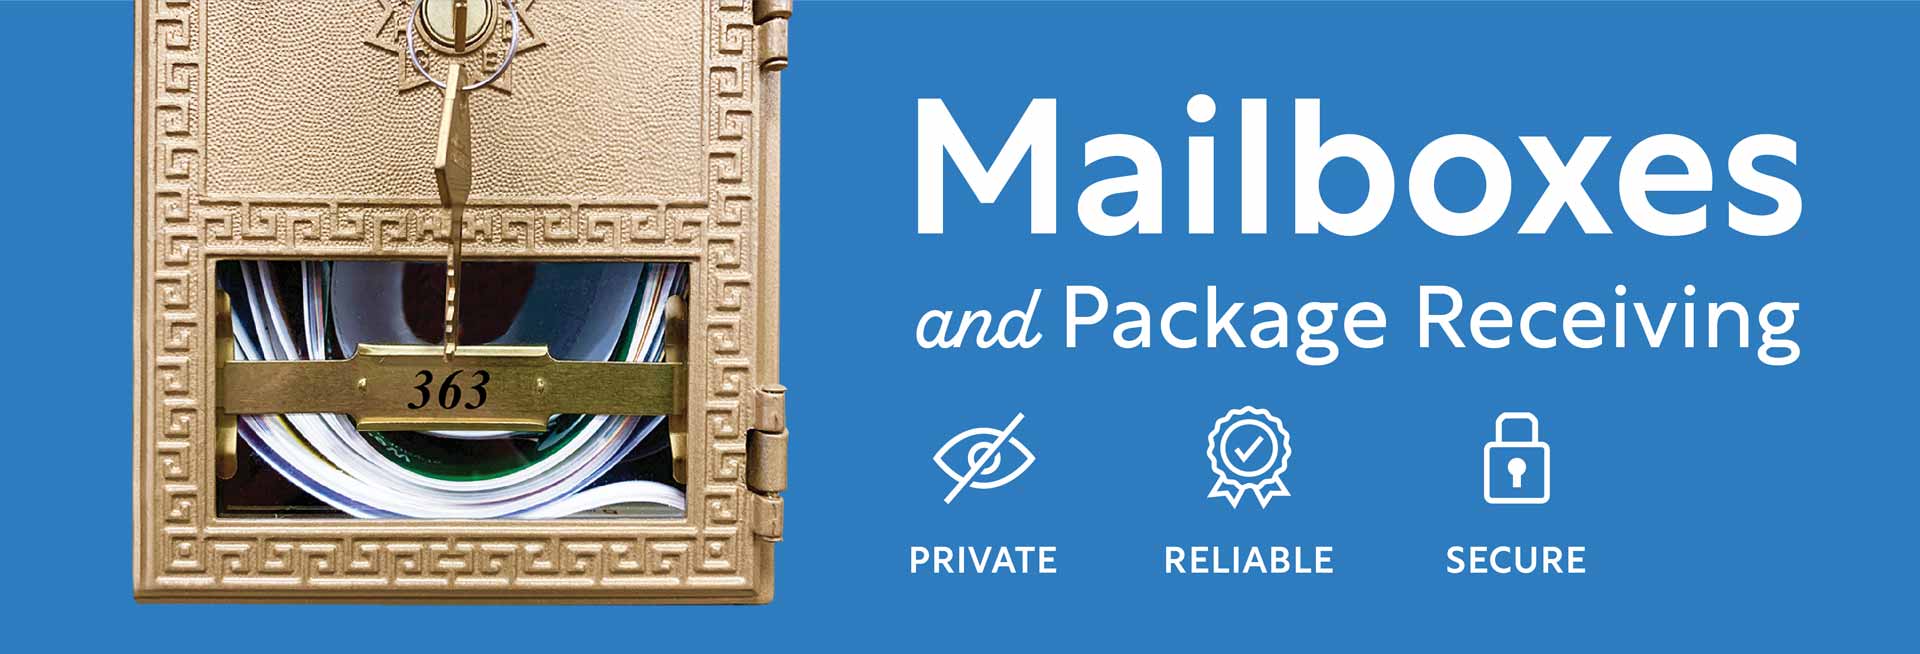 Mailboxes and Package Receiving. Private. Reliable. Secure.